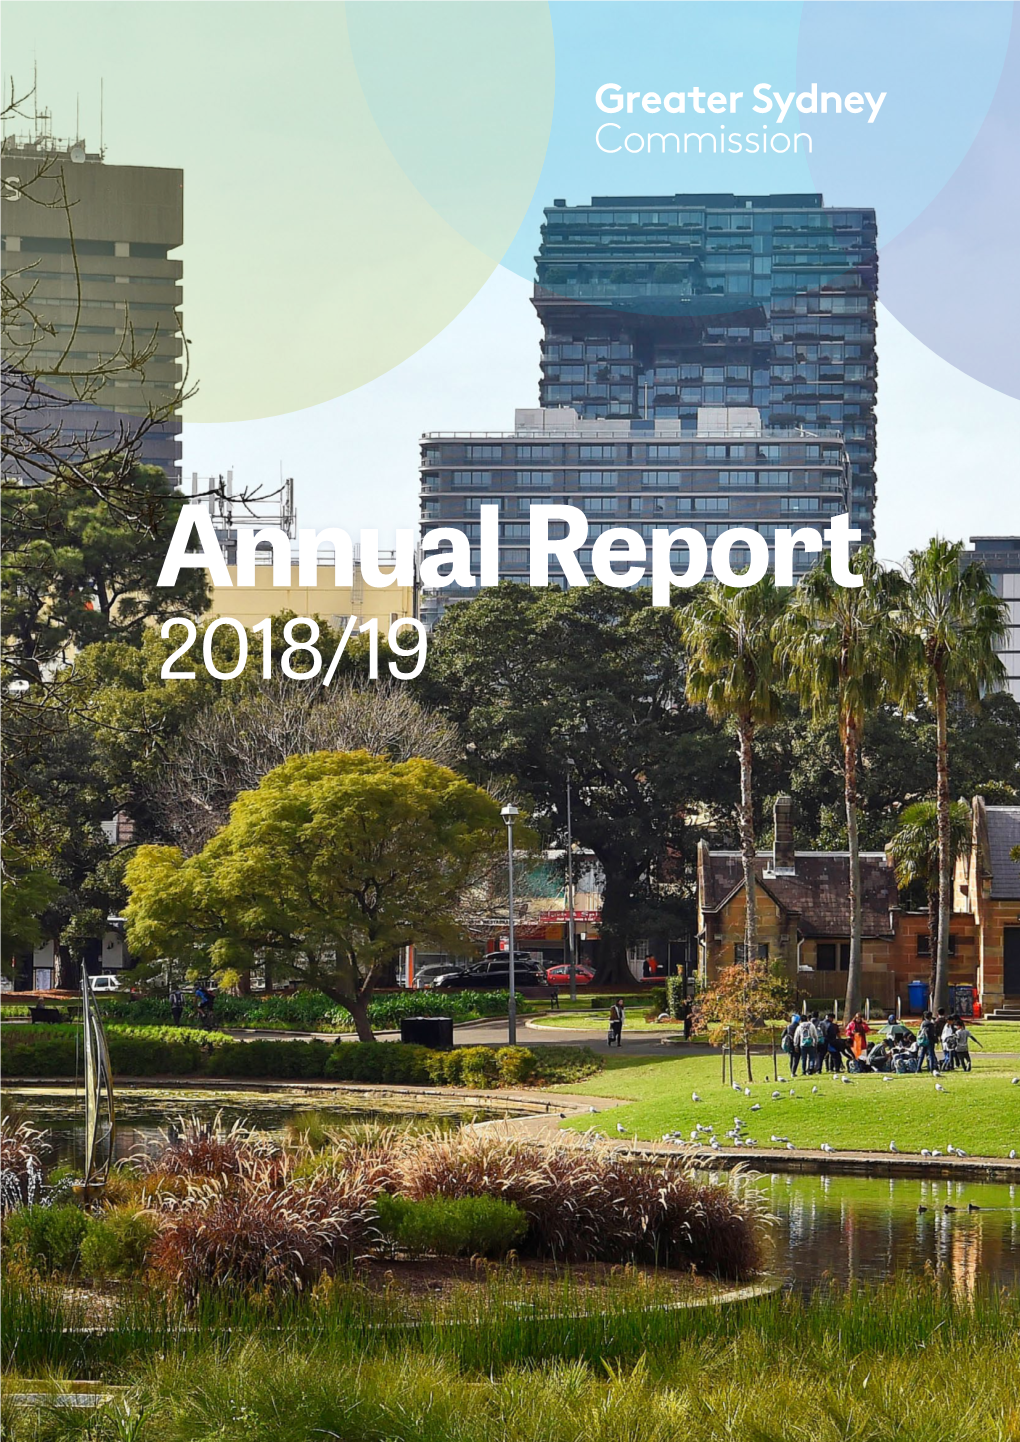 Greater Sydney Commission Annual Report 2018-19.Pdf